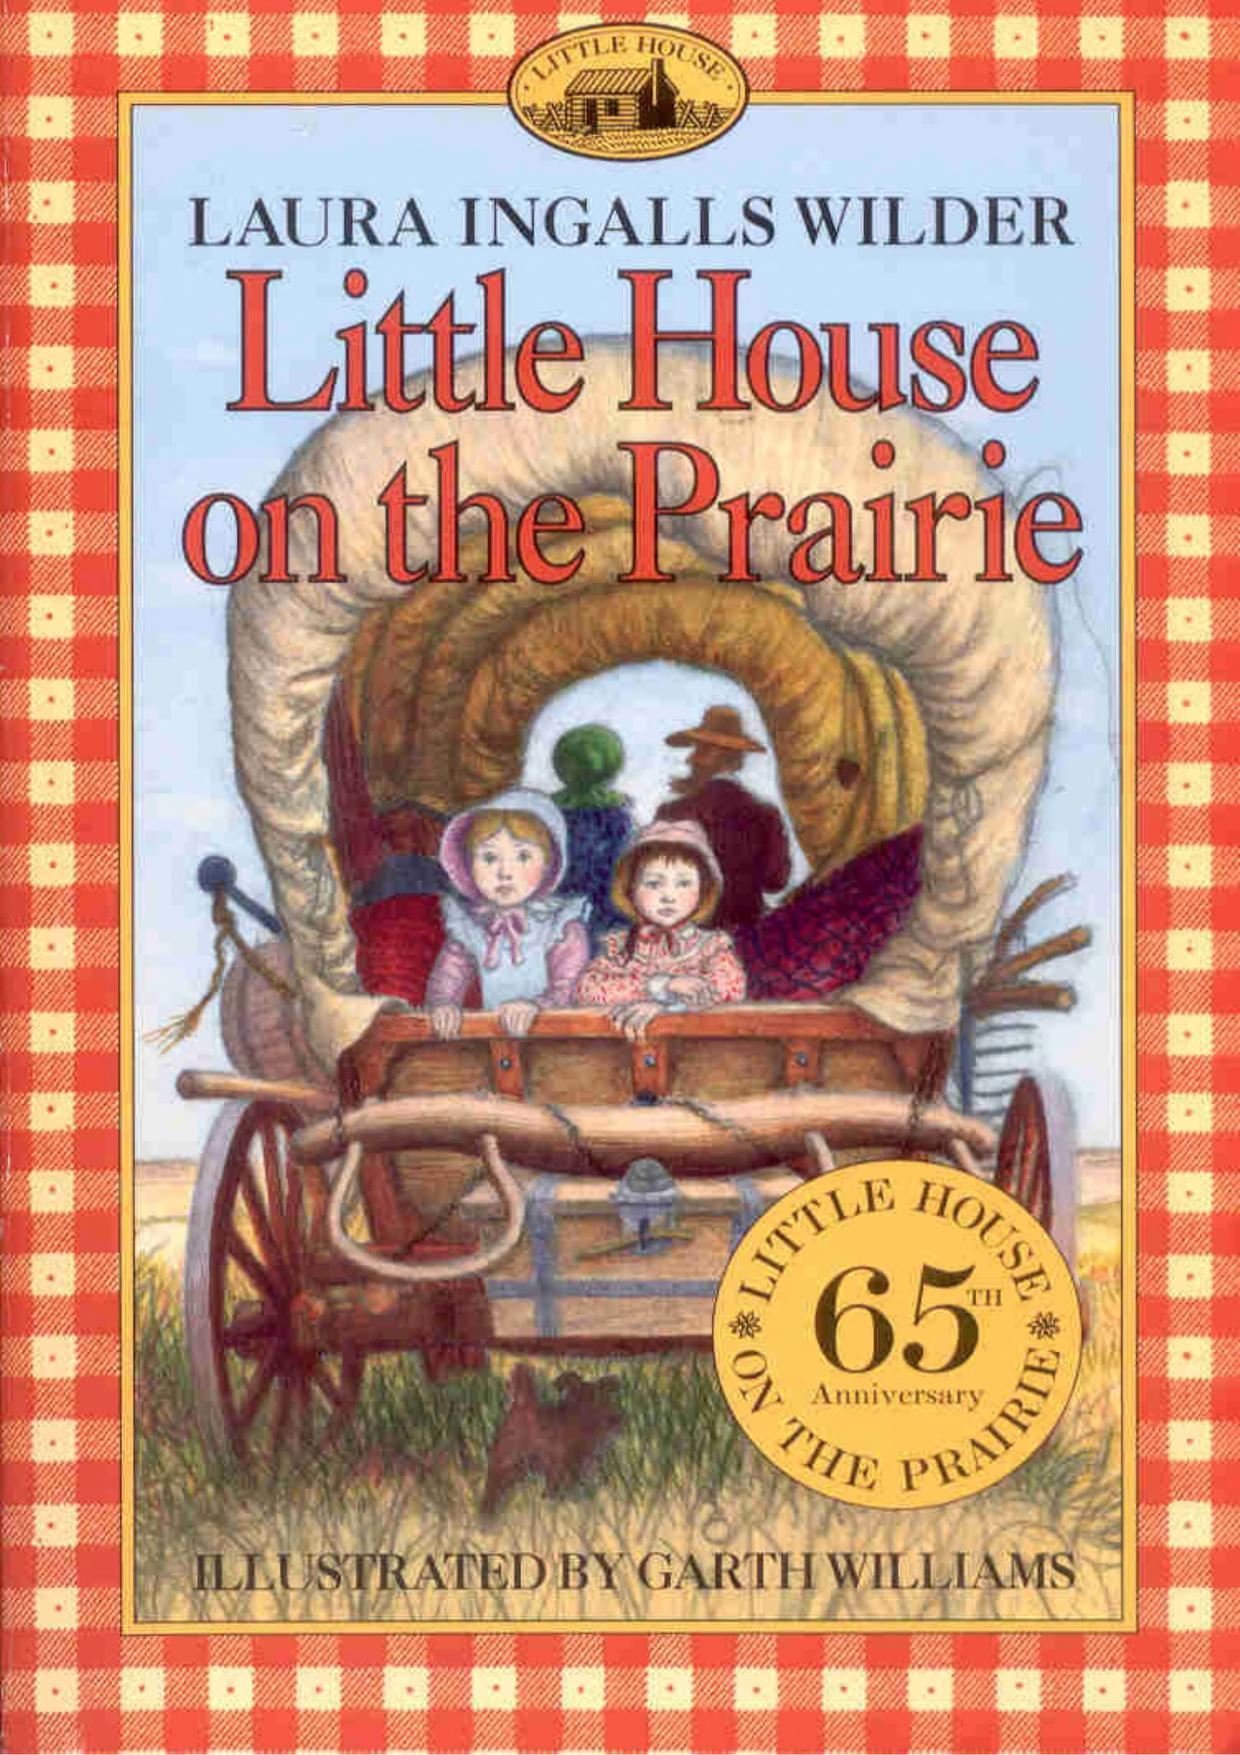 Illustrated book cover of "Little House on the Prairie" by Laura Ingall's Wilder. 